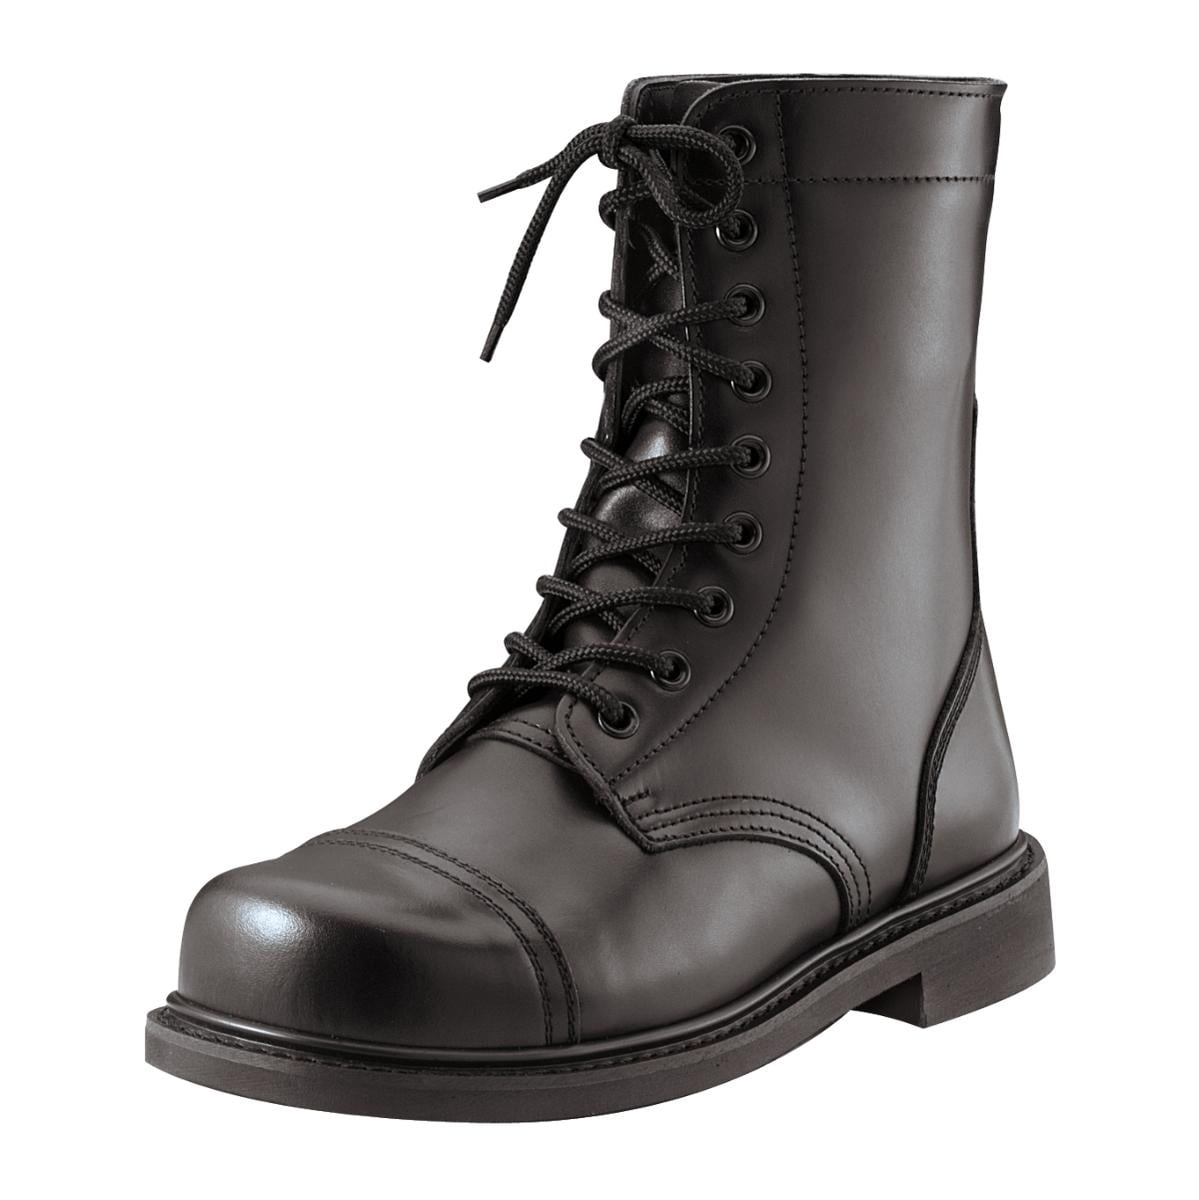 Black Military Style Steel Toe Combat or Jump Boots